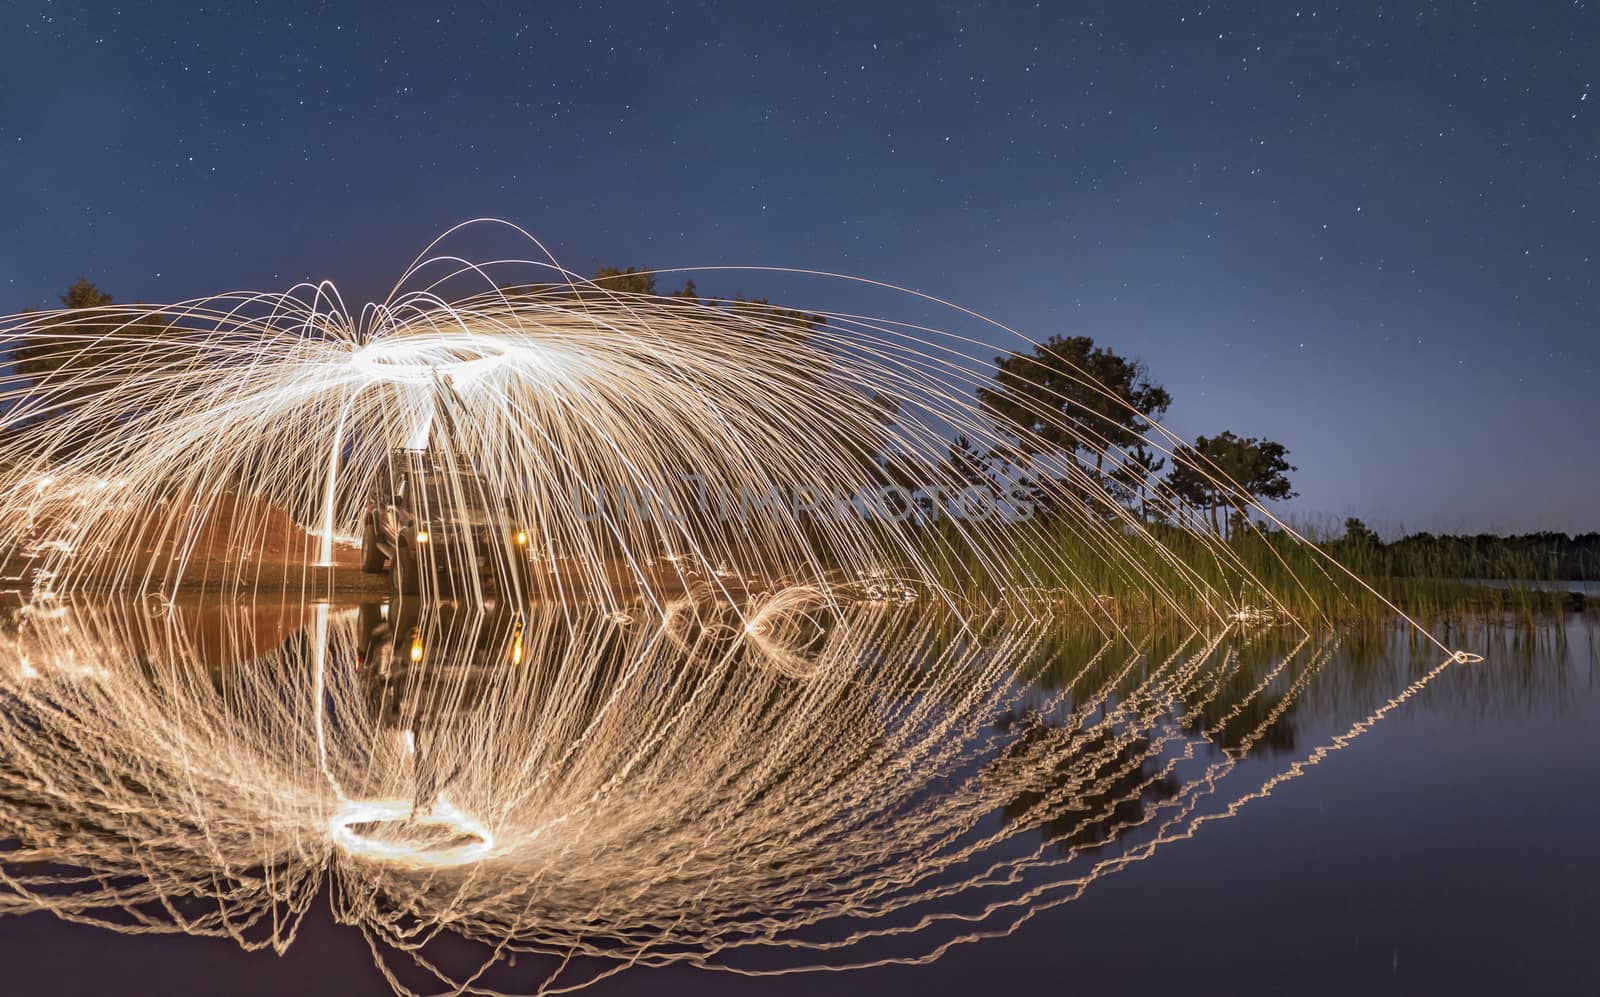 example of long exposure photography by crazymedia007